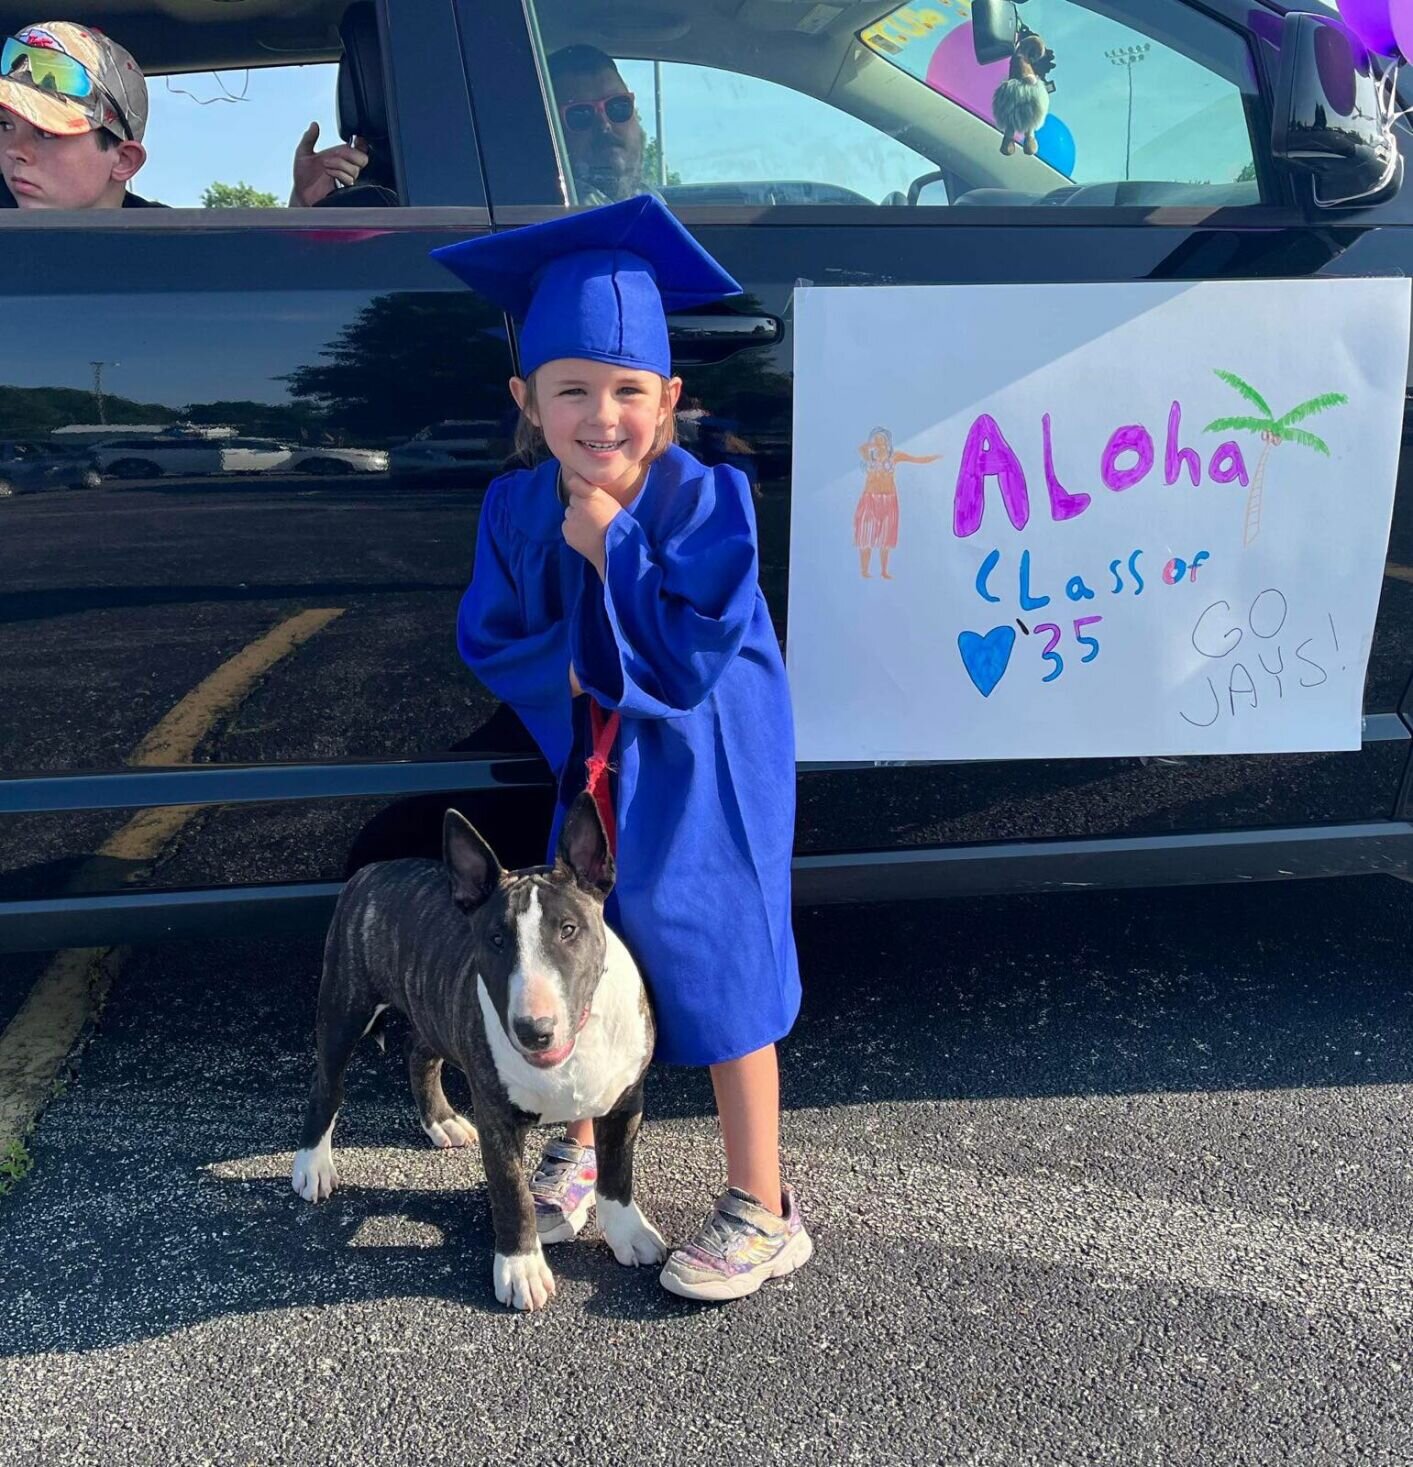 Aloha, Class of '35! This sweet Hubble kindergarten grad poses for a photo with her pup ahead of the parade. 